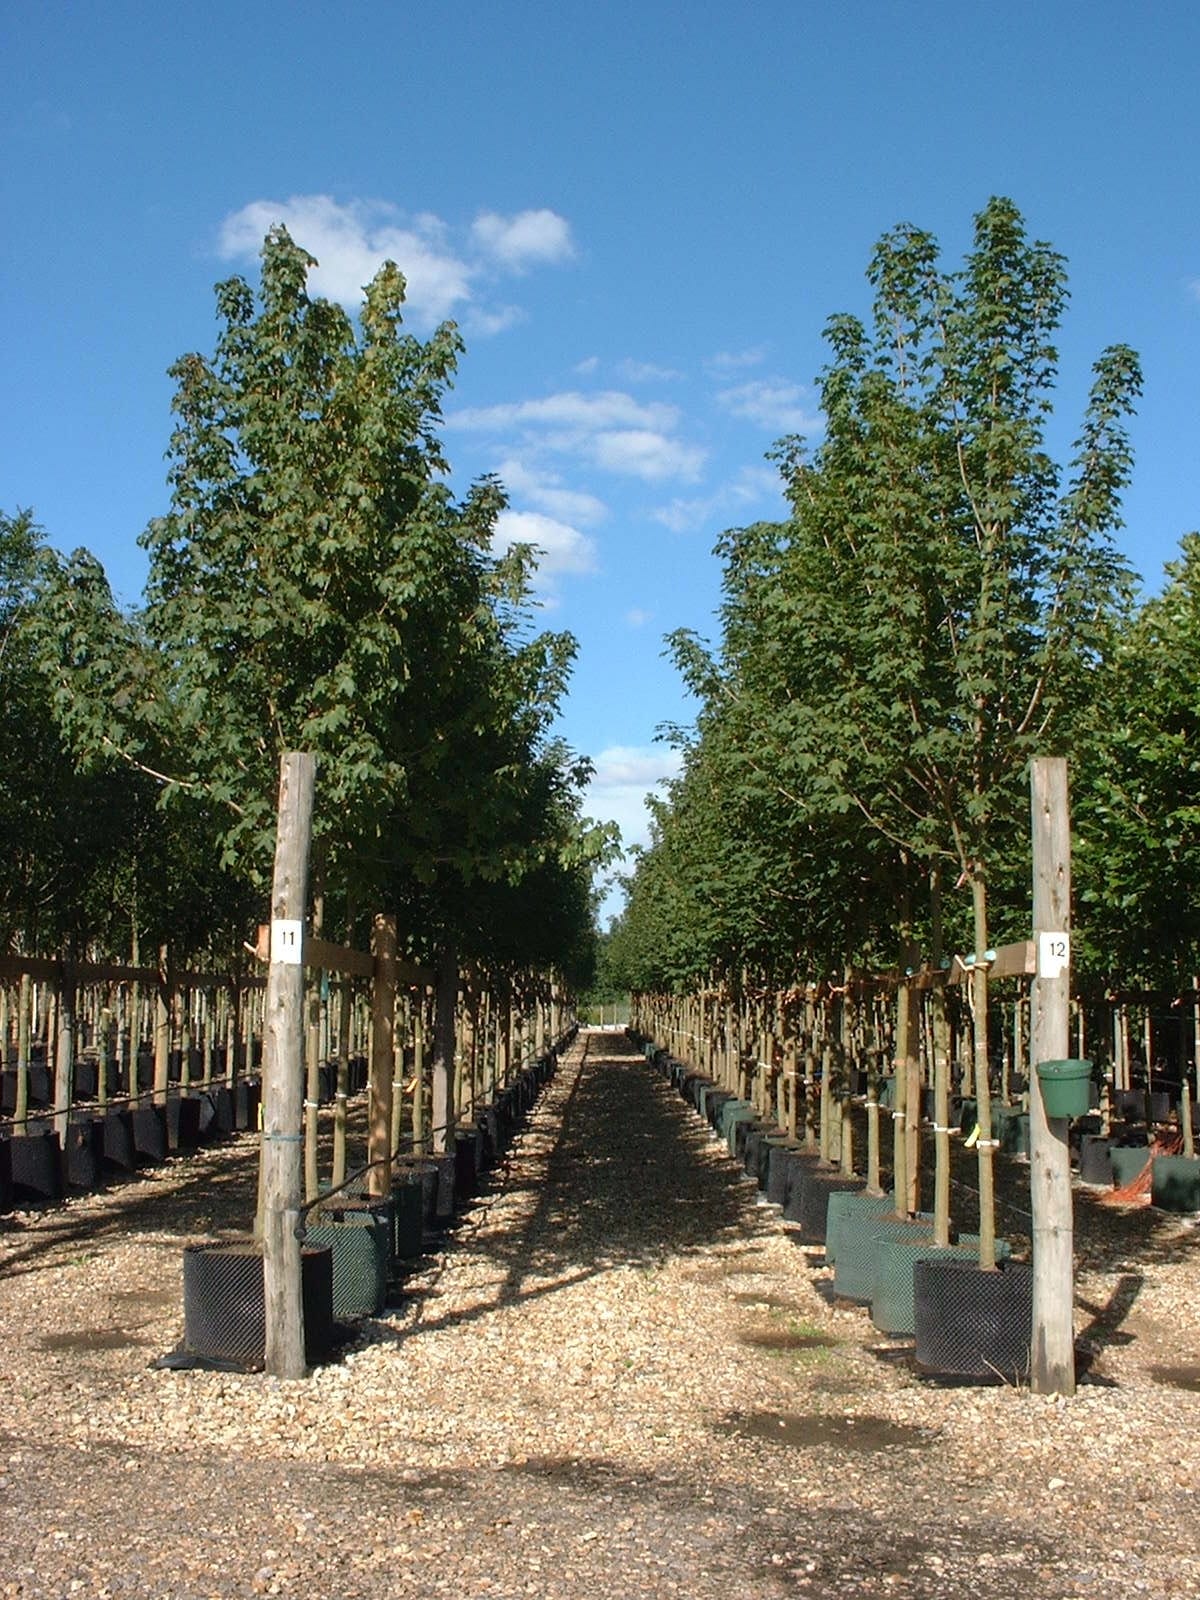 Acer platanoides semi mature trees growing in containers